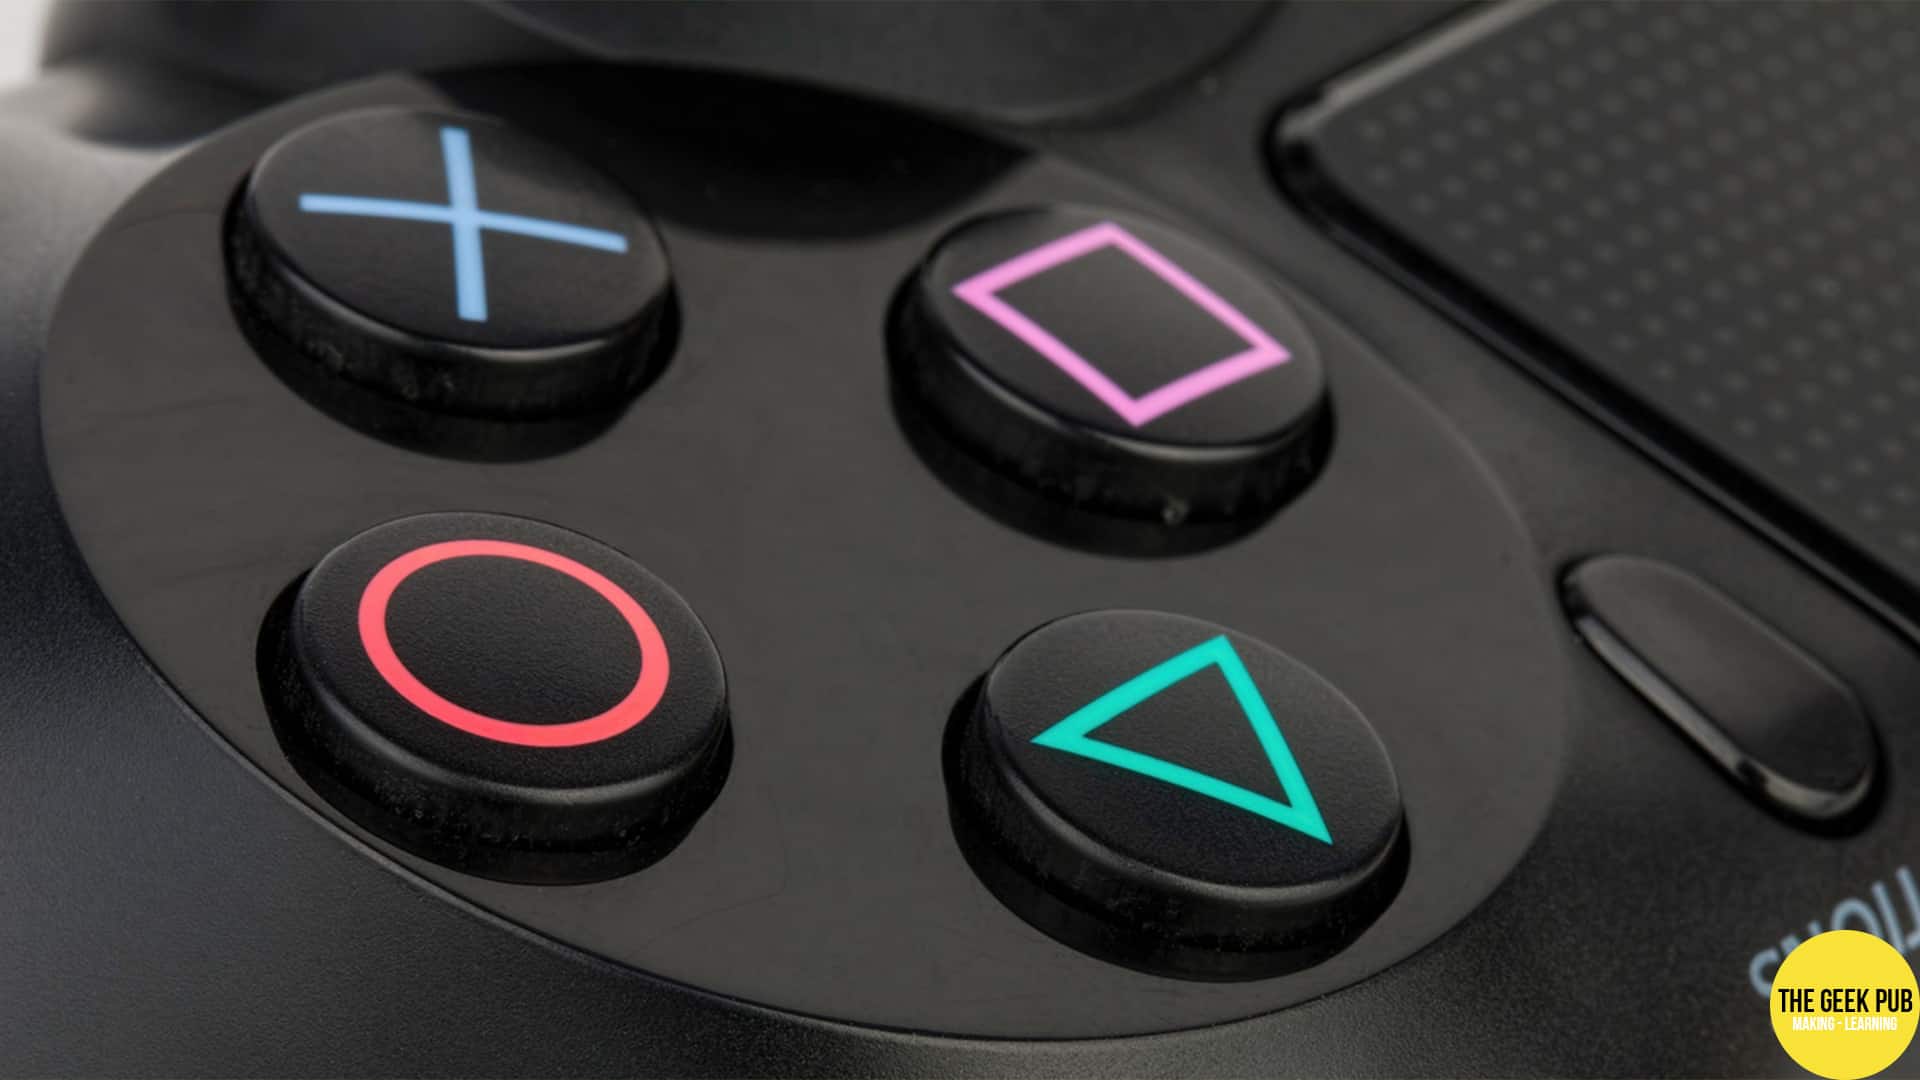 how to find a missing ps4 controller